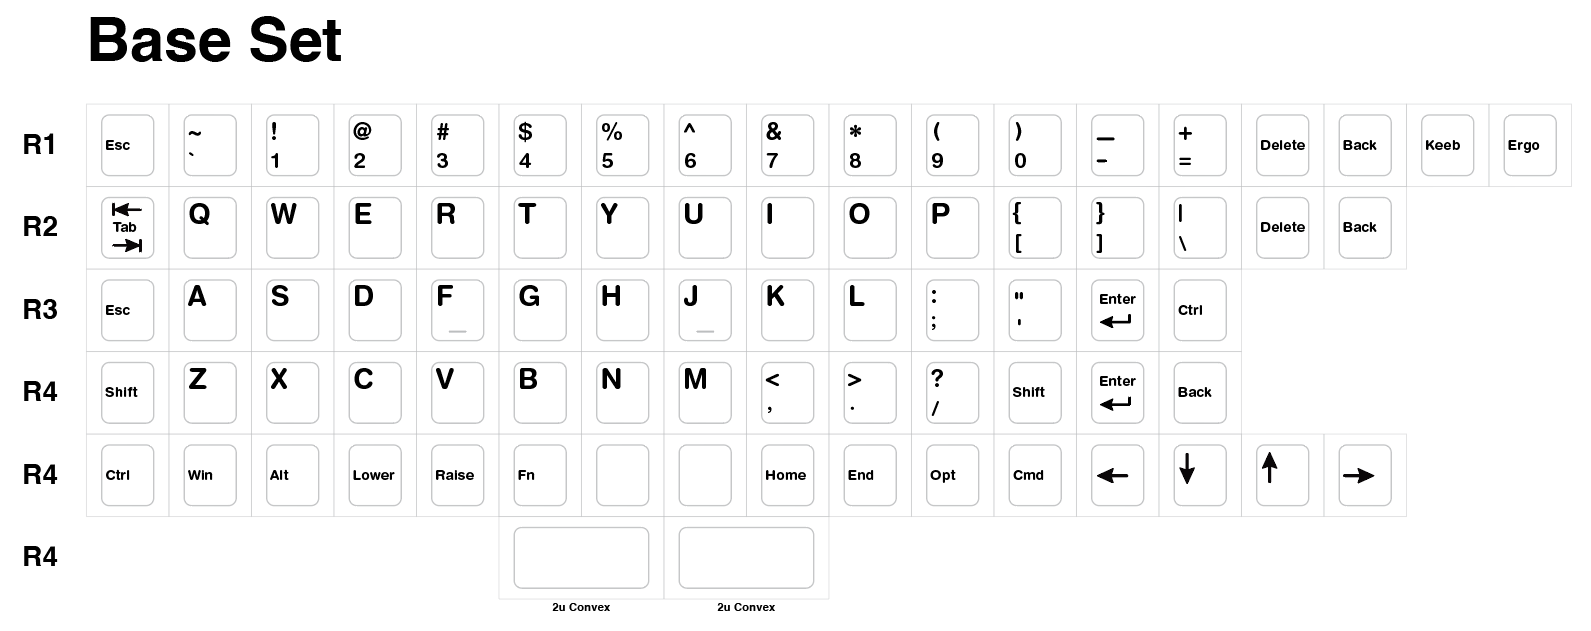 Flatlay design file for the keycap set. It’s a QWERTY layout with bar homing on the F and J. R1 has extra keys Delete, Back, Keeb, and Ergo. R2 has a 1u pipe, Delete, and Back. R3 has Esc, Enter, and Ctrl. R4 has 2 Shifts, Enter, Back, Ctrl, Win, Alt, Lower, Raise, Fn, Home, End, Opt, Cmd and arrow keys.